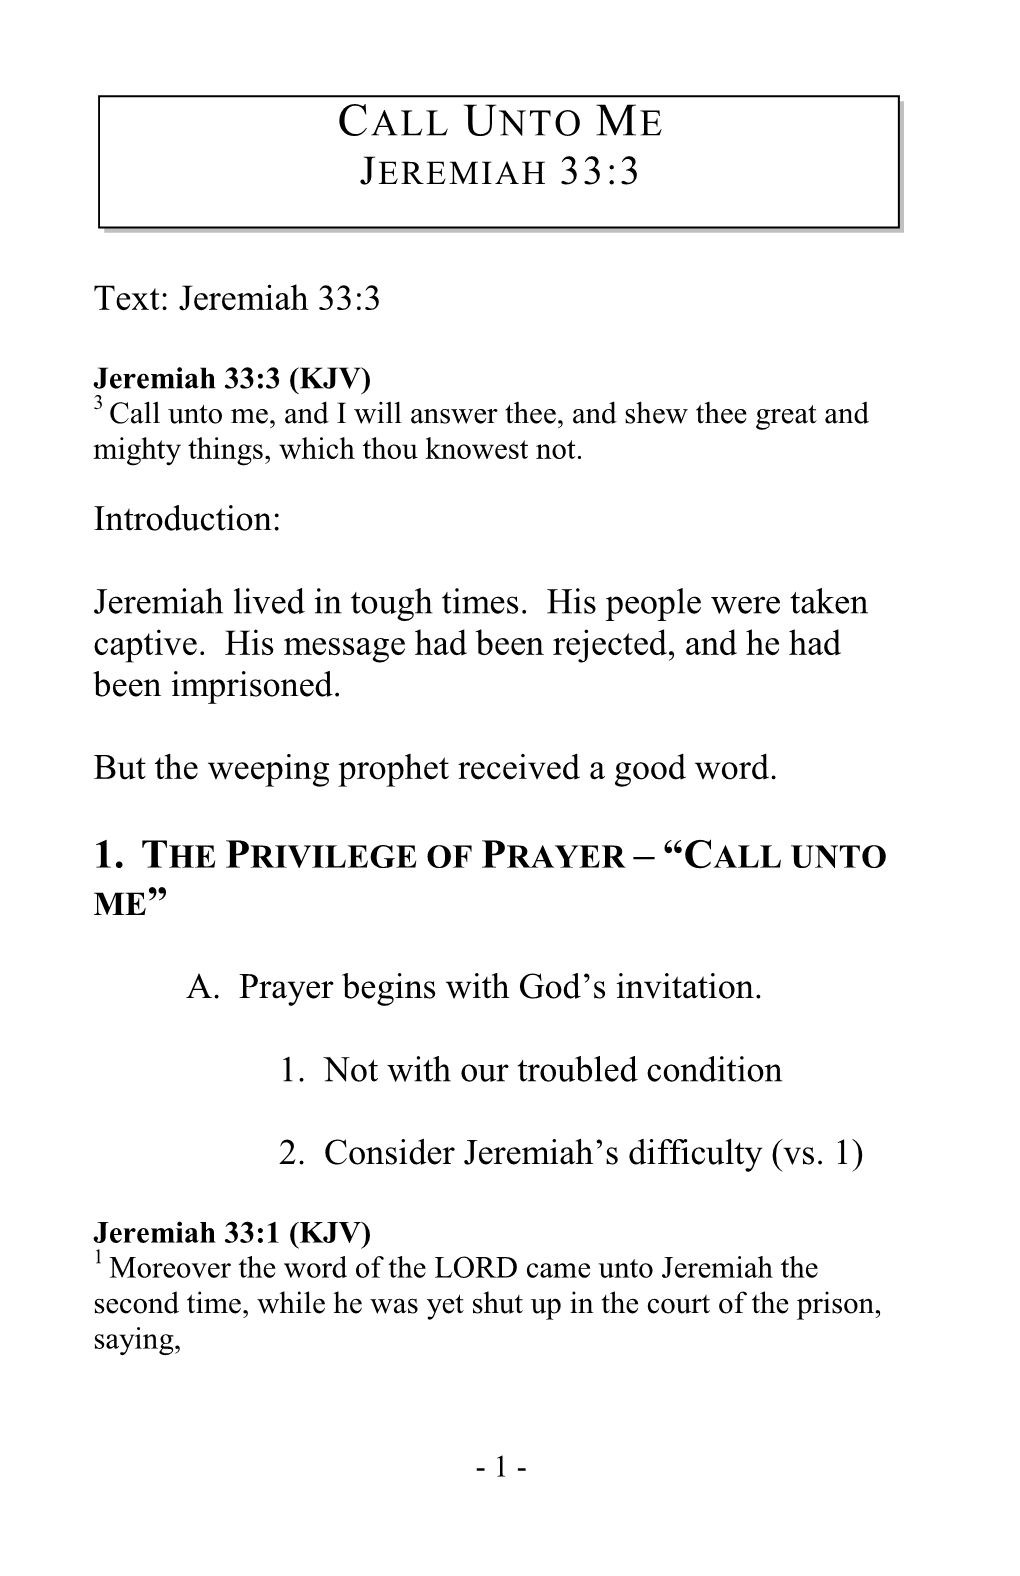 CALL UNTO ME Text: Jeremiah 33:3 Introduction: Jeremiah Lived In